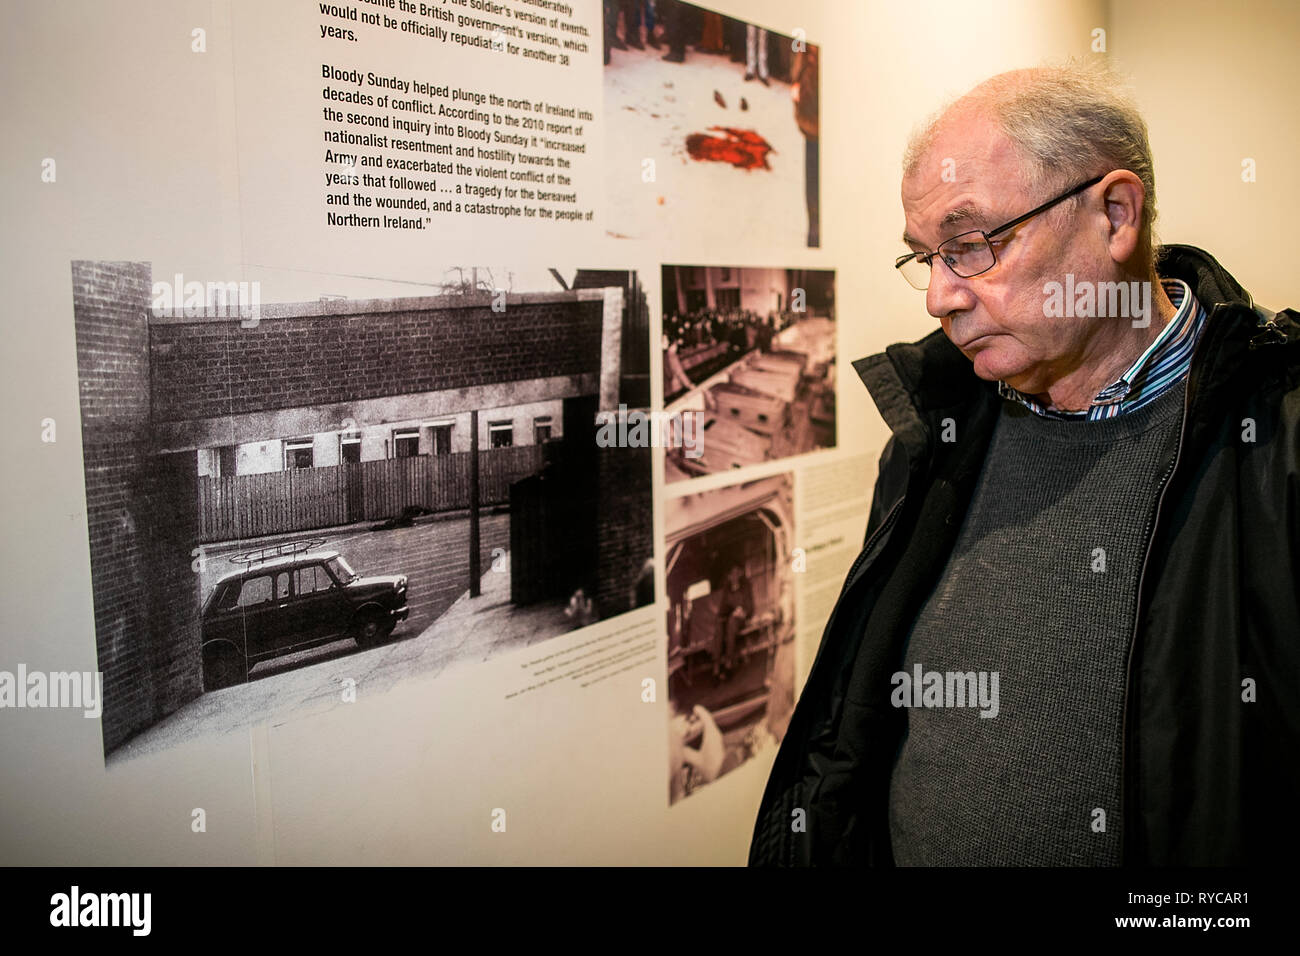 Mickey McKinney looks at a photo on the wall of the Museum of Free Derry which show his killed brother William in Derry on Bloody Sunday. The Public Prosecution Service is expected to announce on Thursday whether it will pursue prosecutions against soldiers over the deaths of 13 people in Londonderry on January 30 1972. Stock Photo